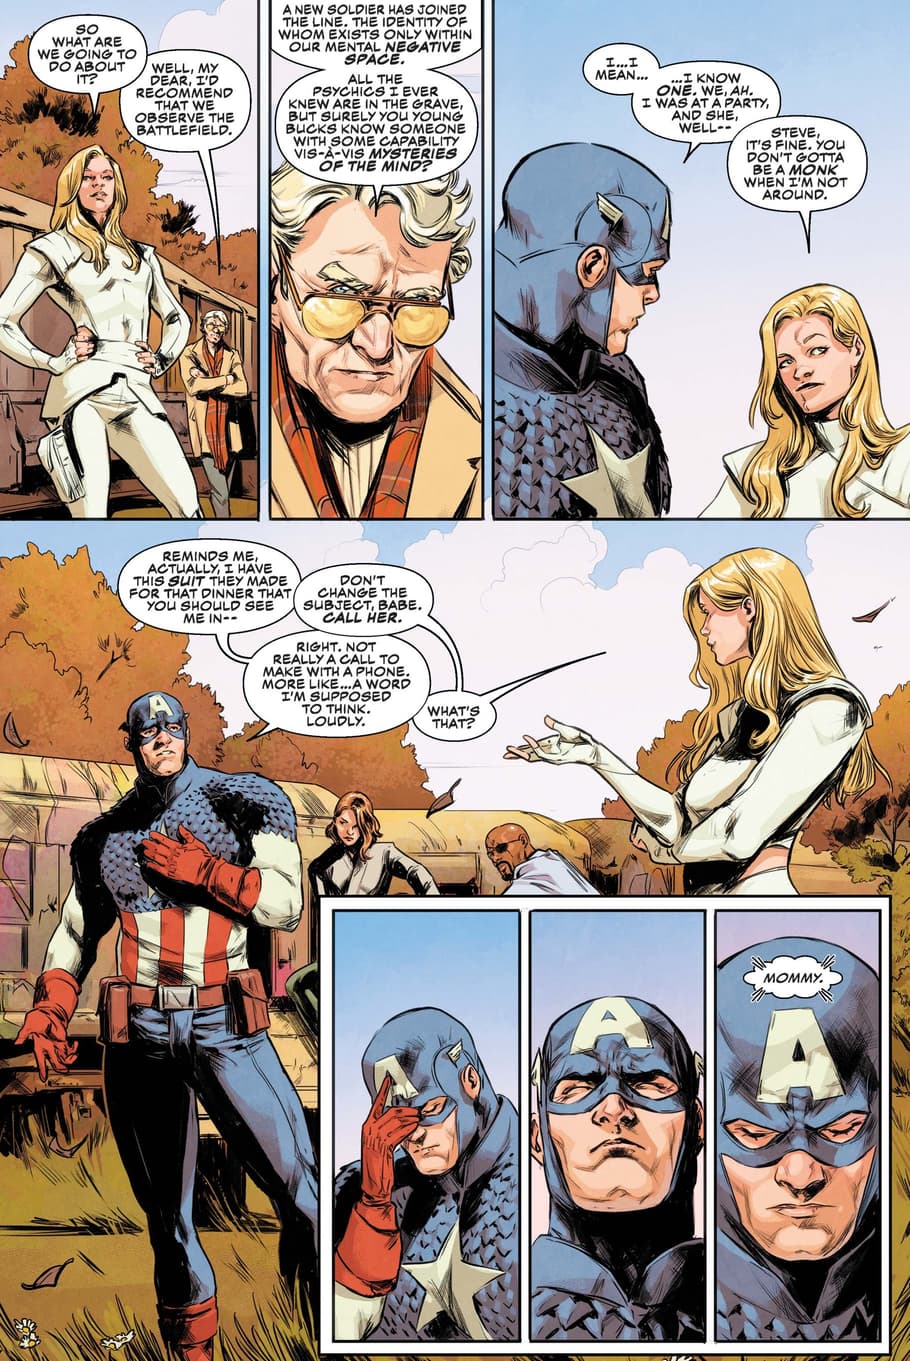 Preview from CAPTAIN AMERICA: SENTINEL OF LIBERTY (2022) #8 with art by Carmen Carnero and Nolan Woodard.